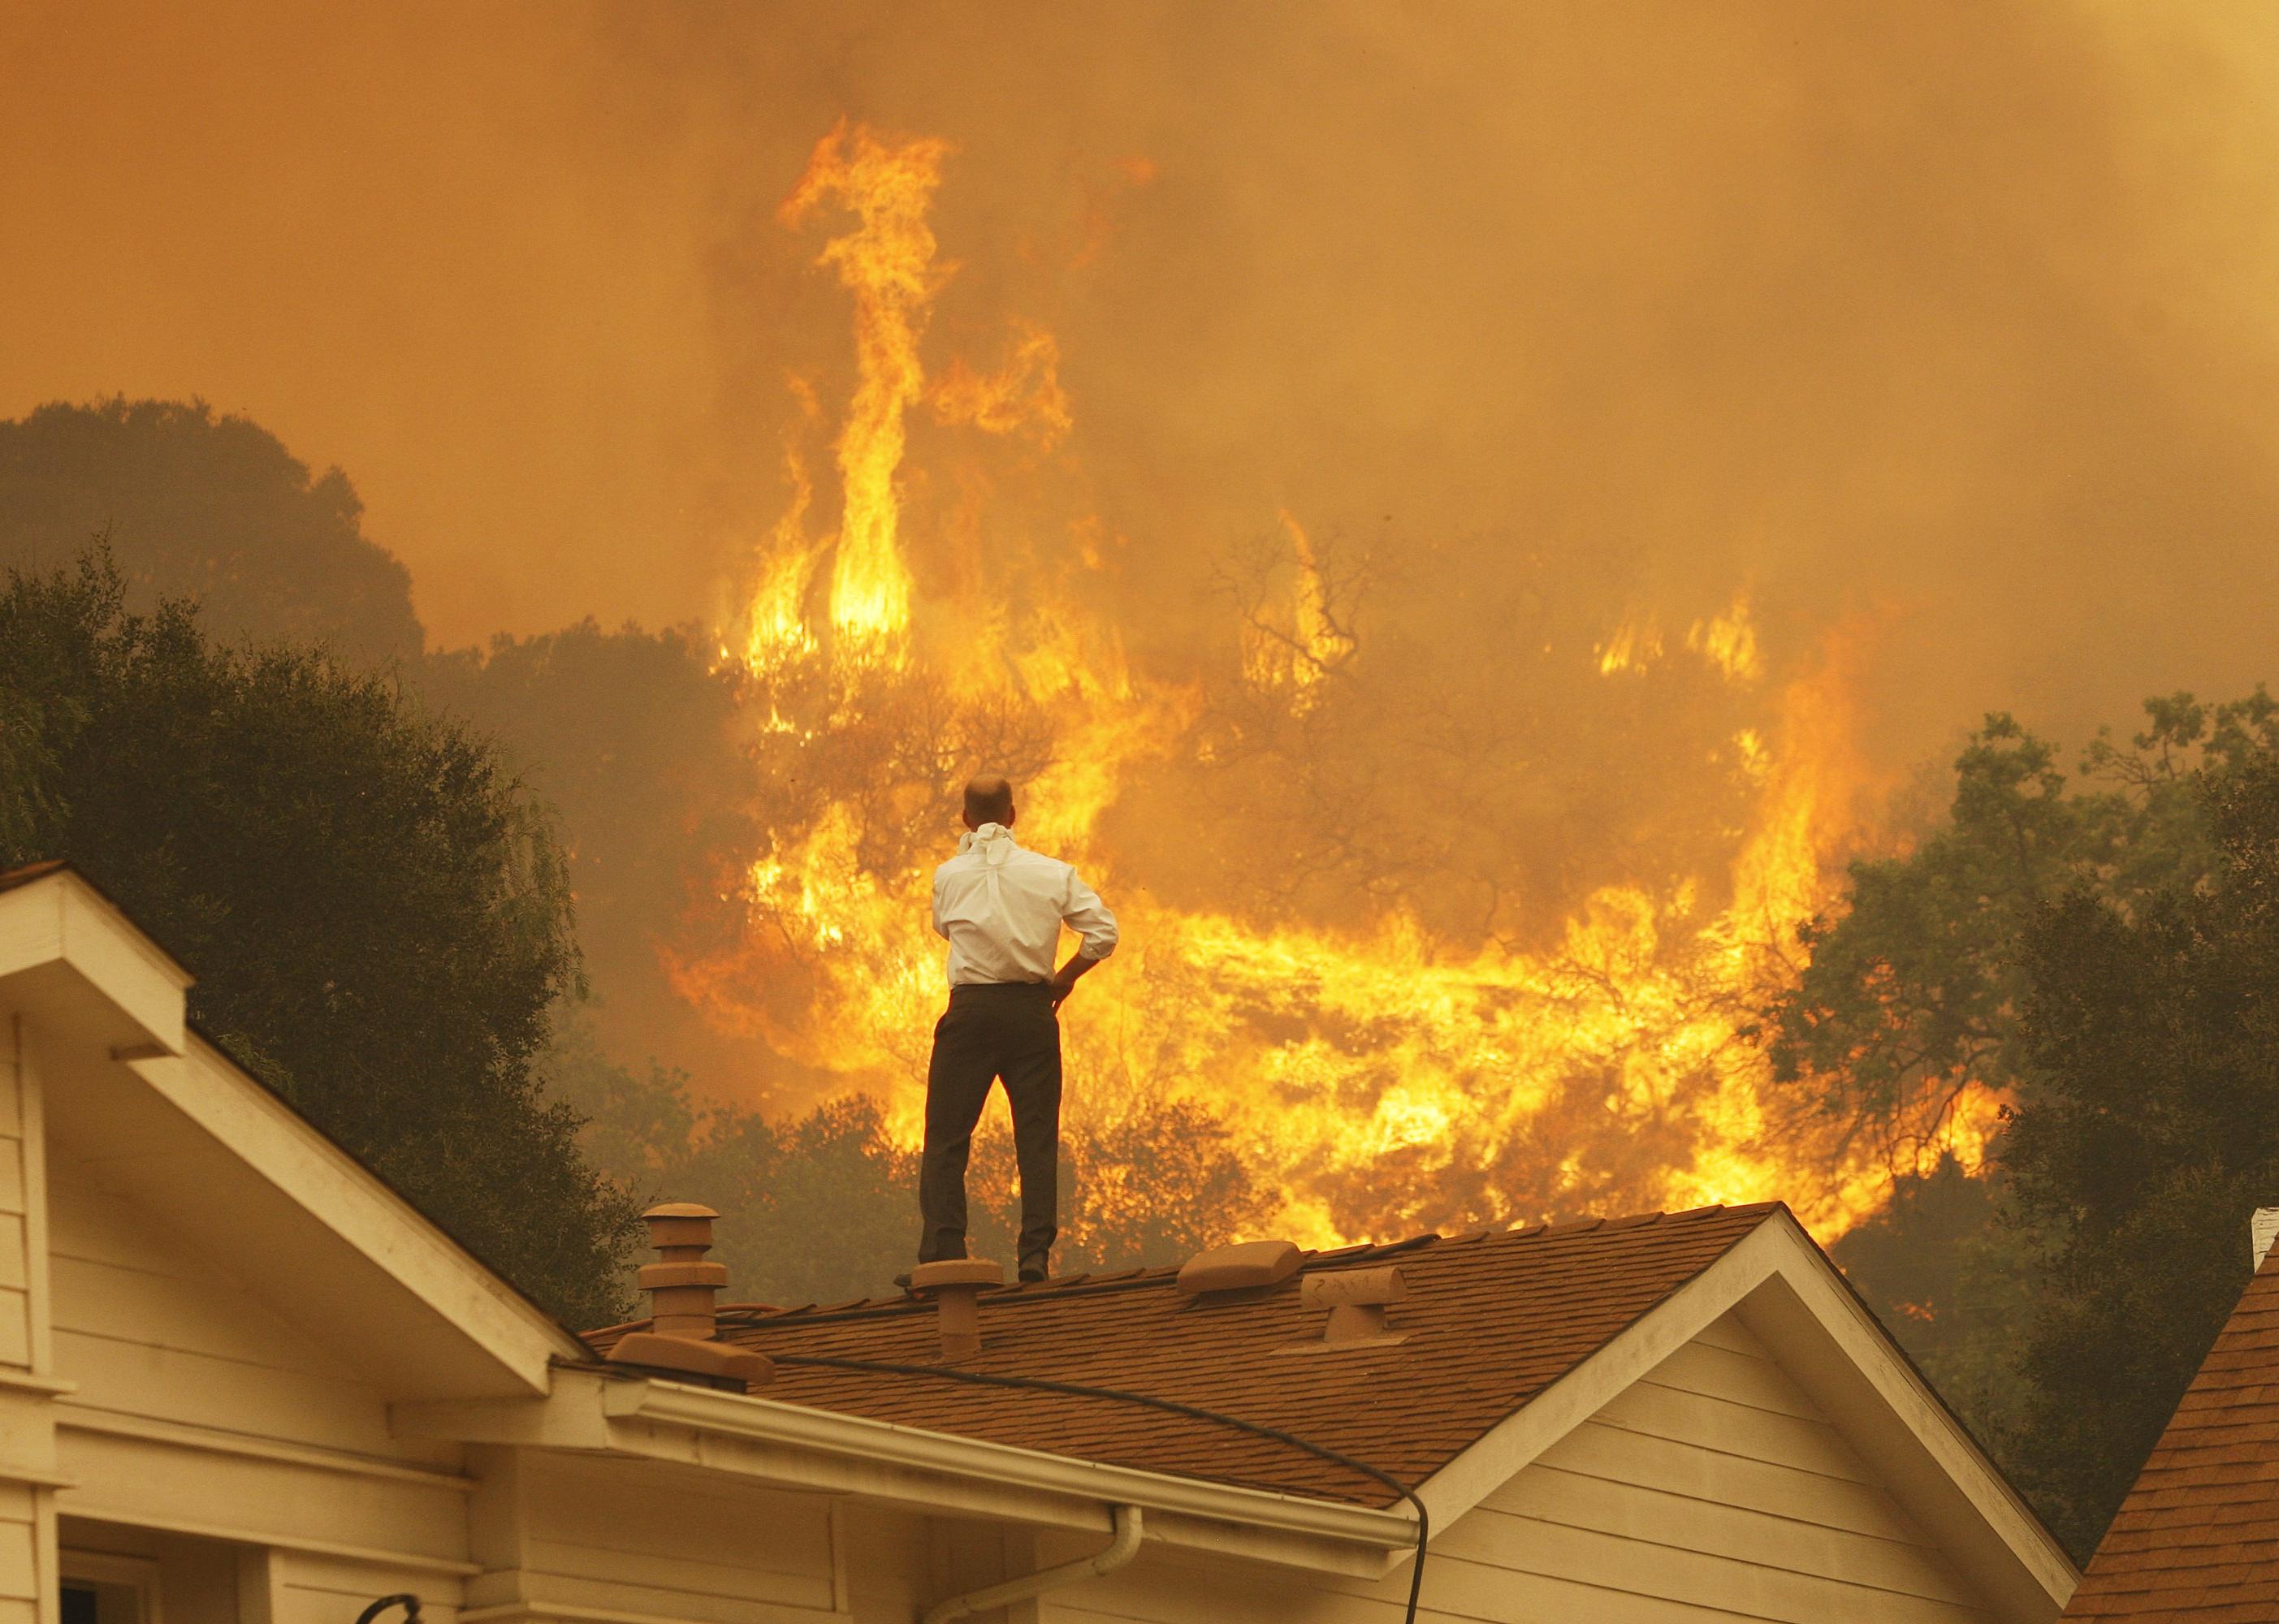 A man on a rooftop looks at approaching flames.